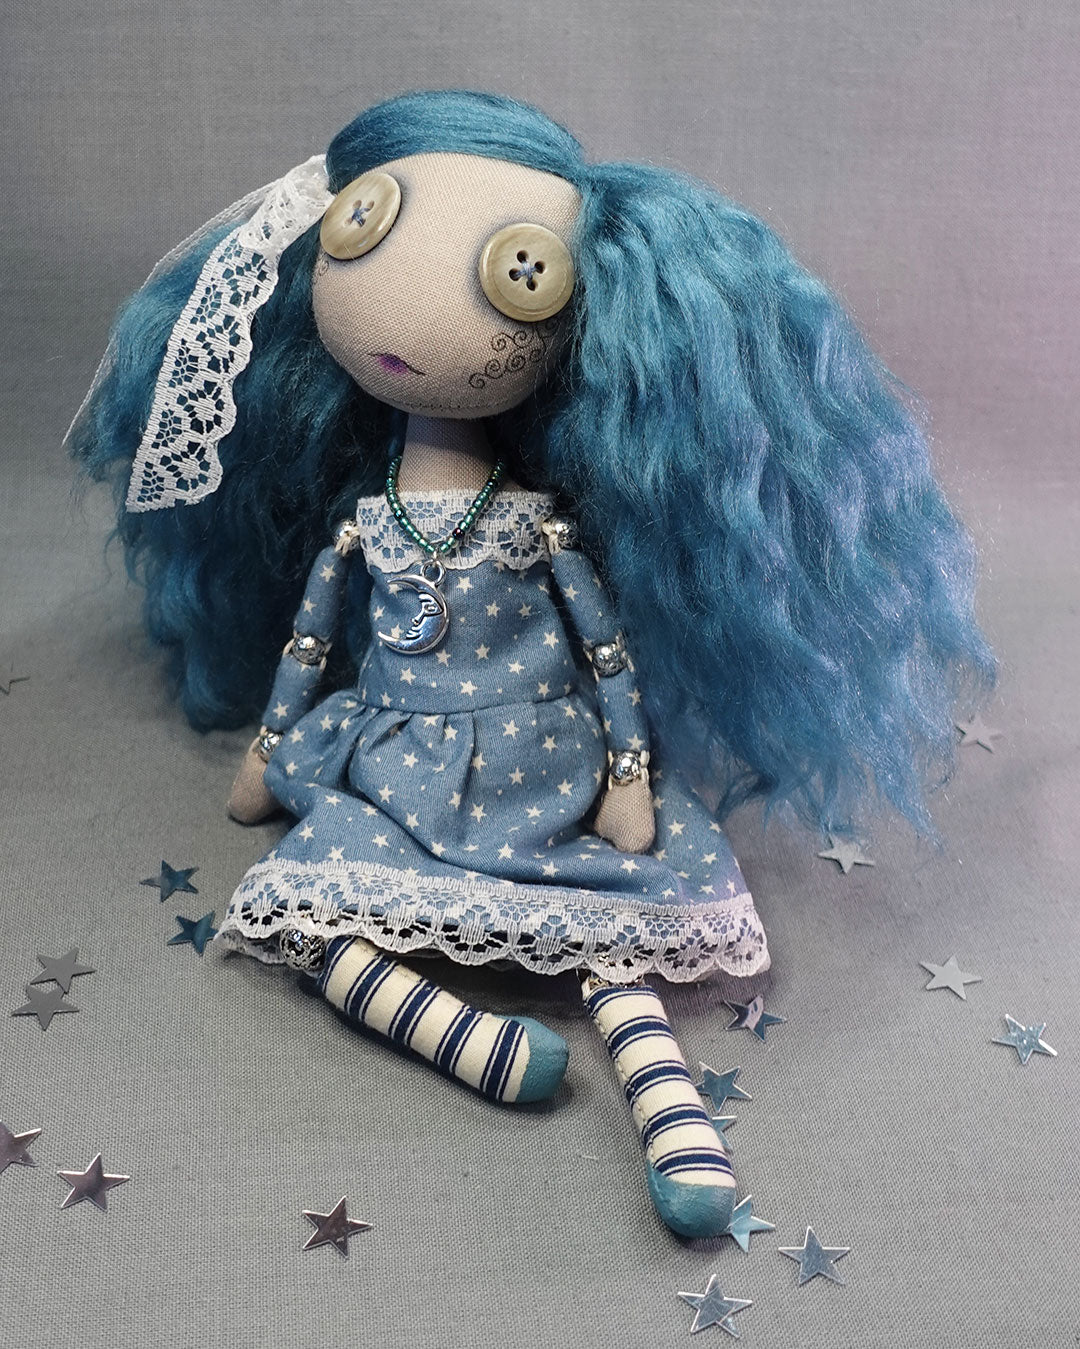 a button eyed cloth art doll with blue hair in star print dress